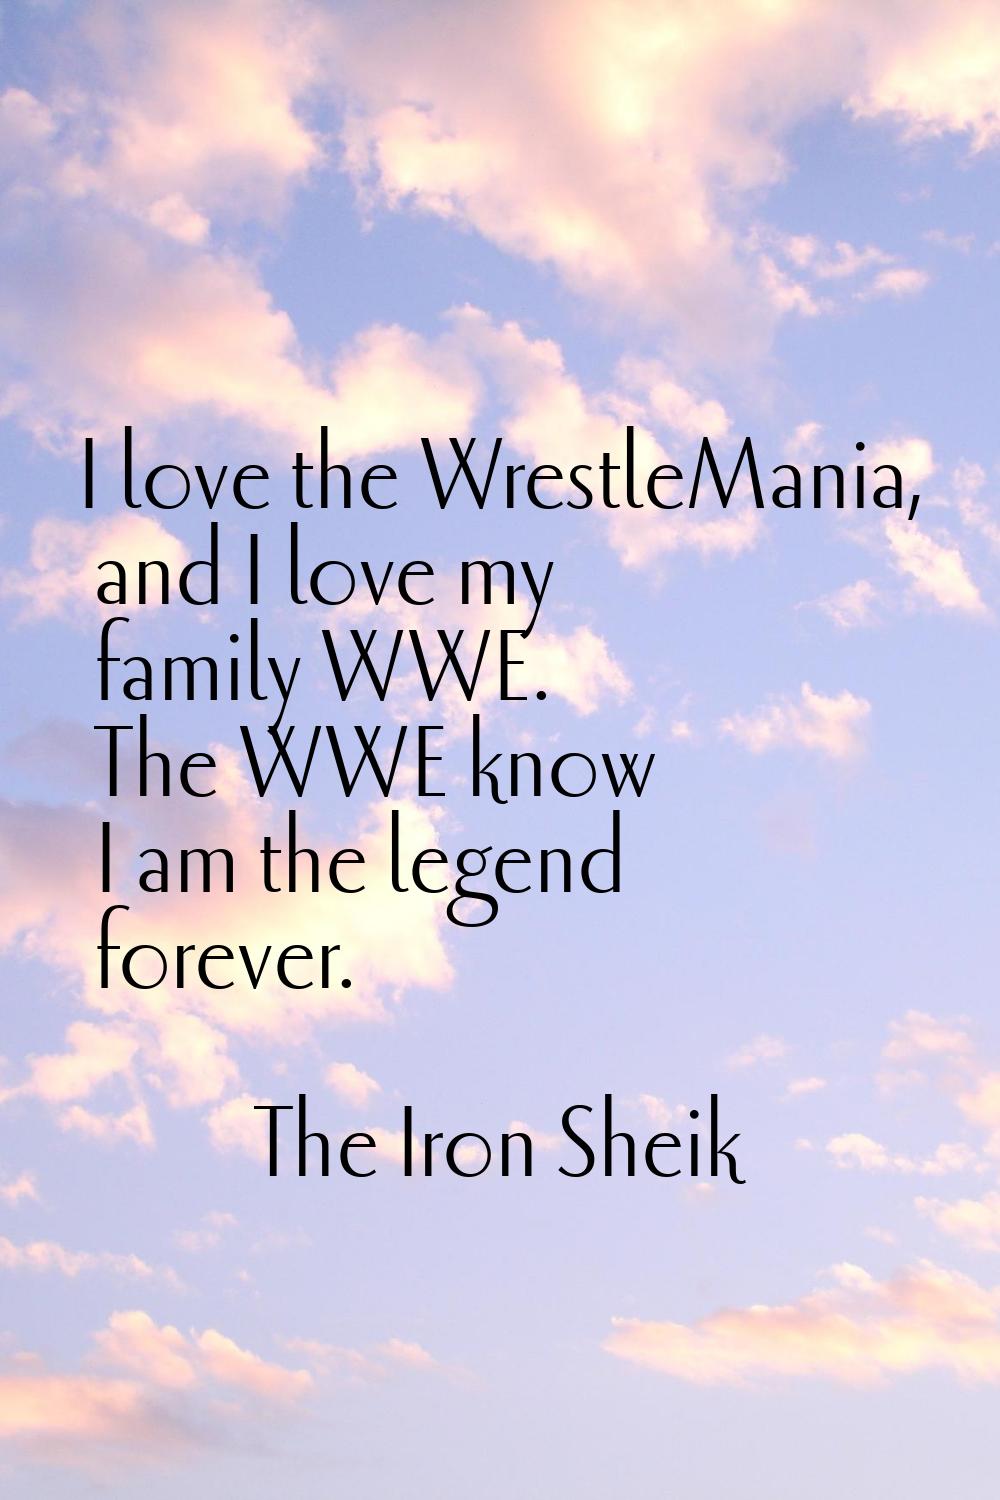 I love the WrestleMania, and I love my family WWE. The WWE know I am the legend forever.